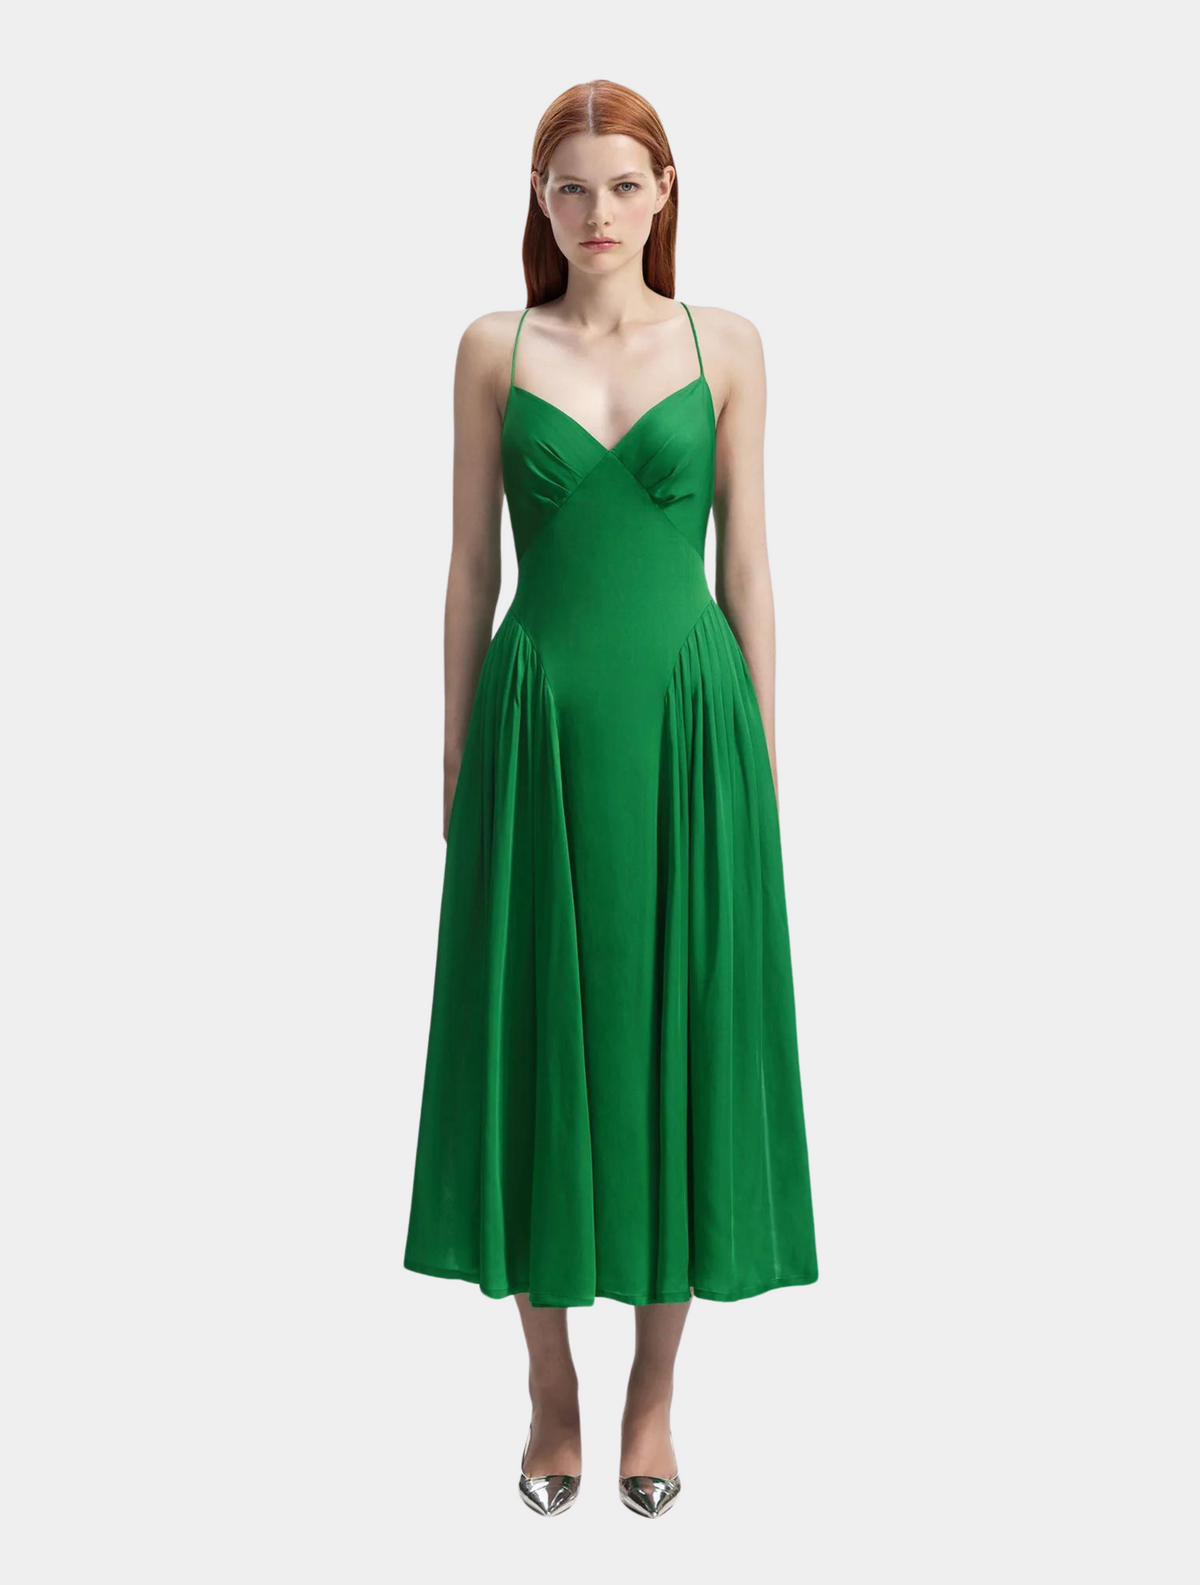 Green V neck midi dress with gathering at hips and spaghetti straps the tighten at the back with a corset style bodice.